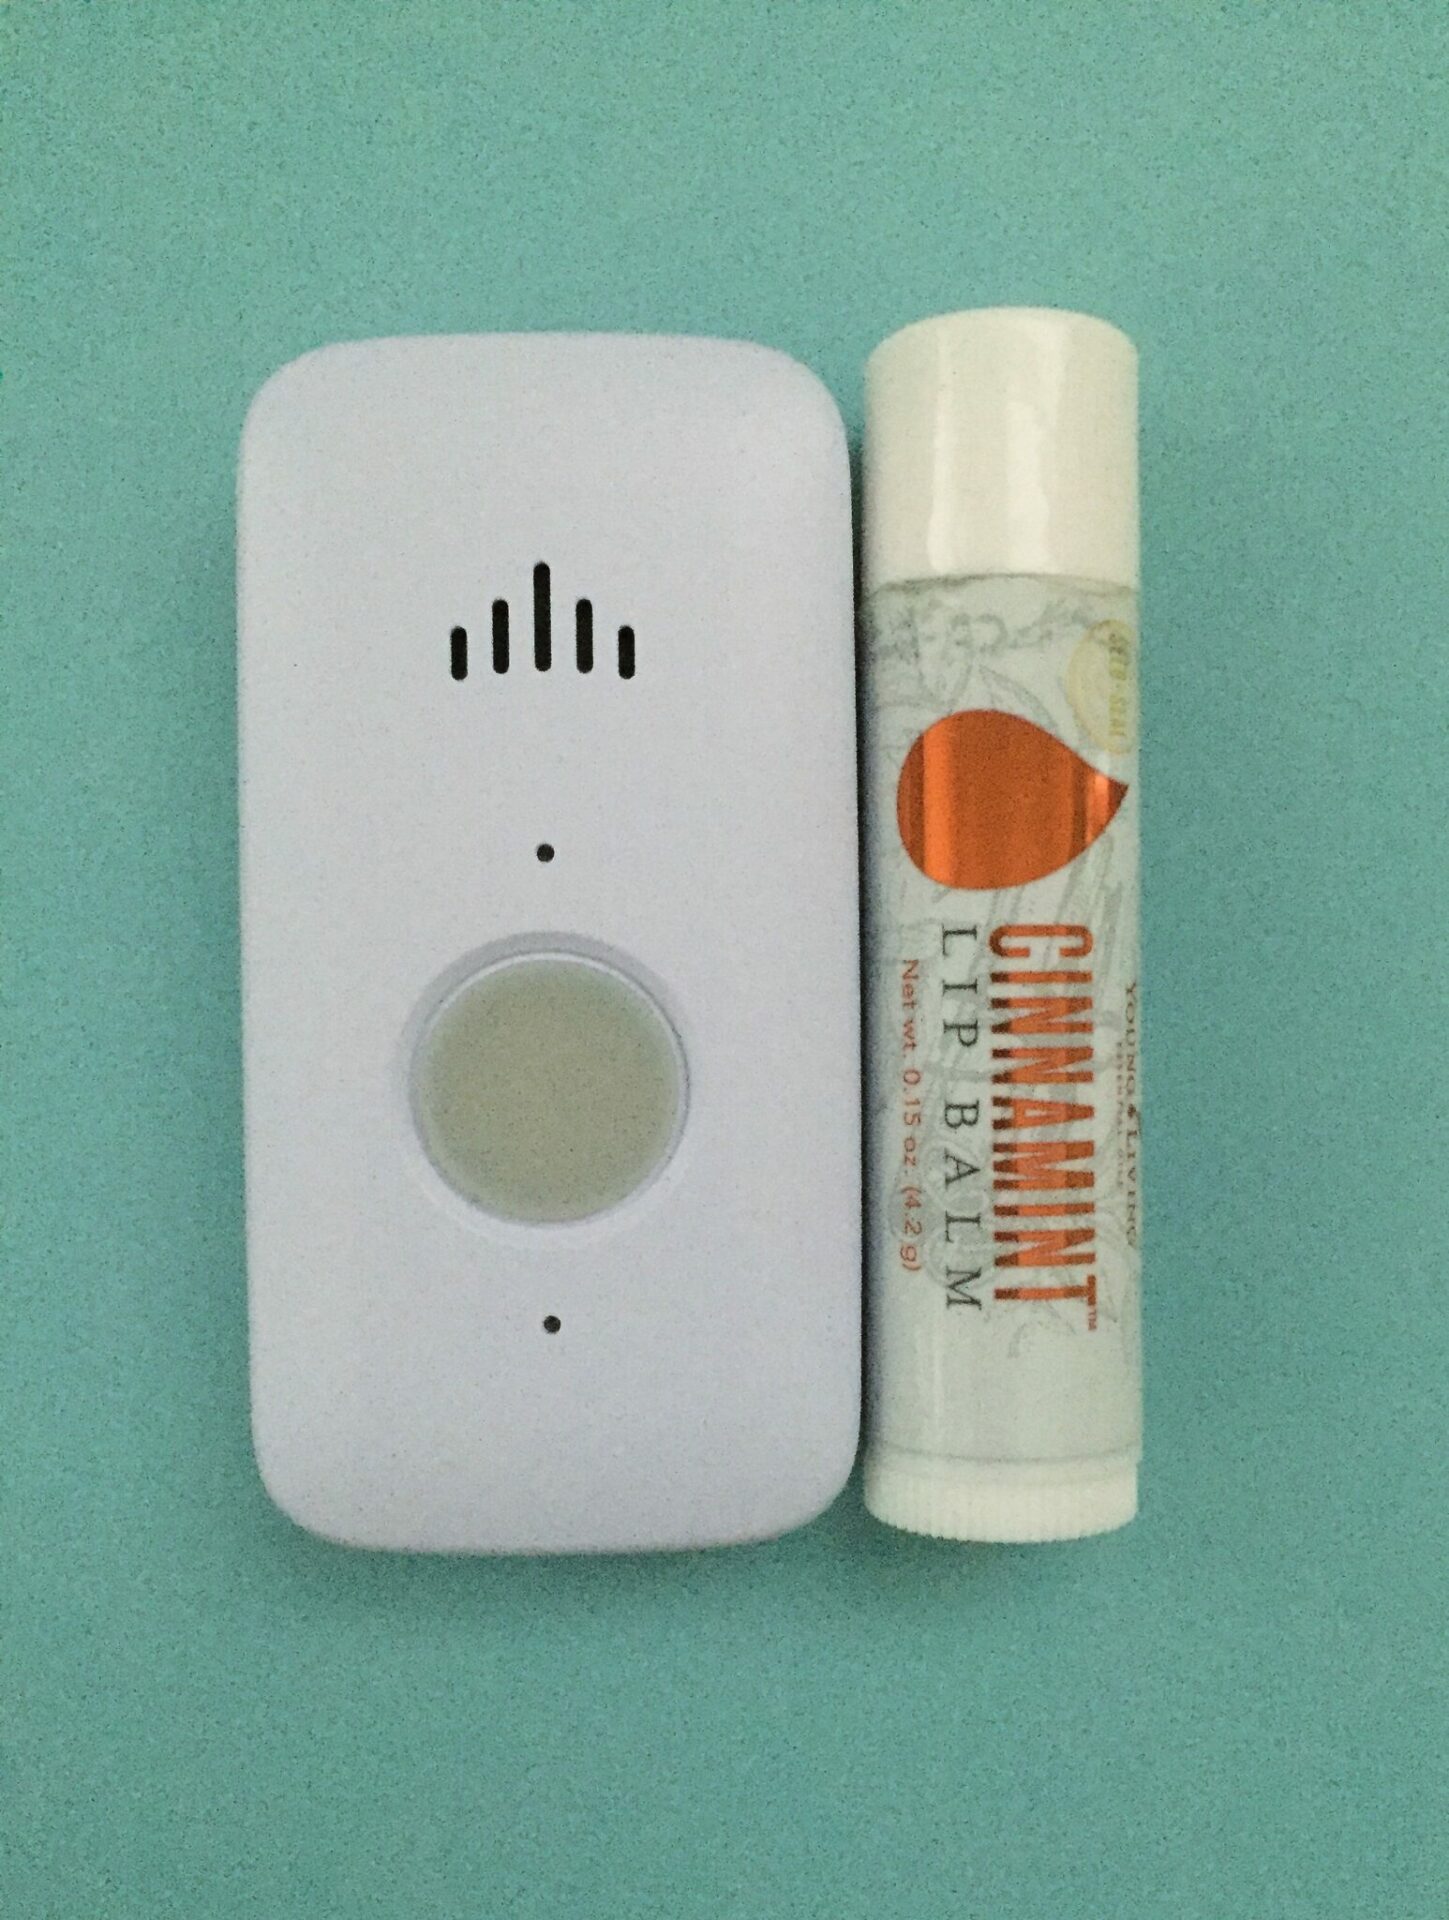 White LifeFone VIPx system next to a tube of lip balm against a blue background